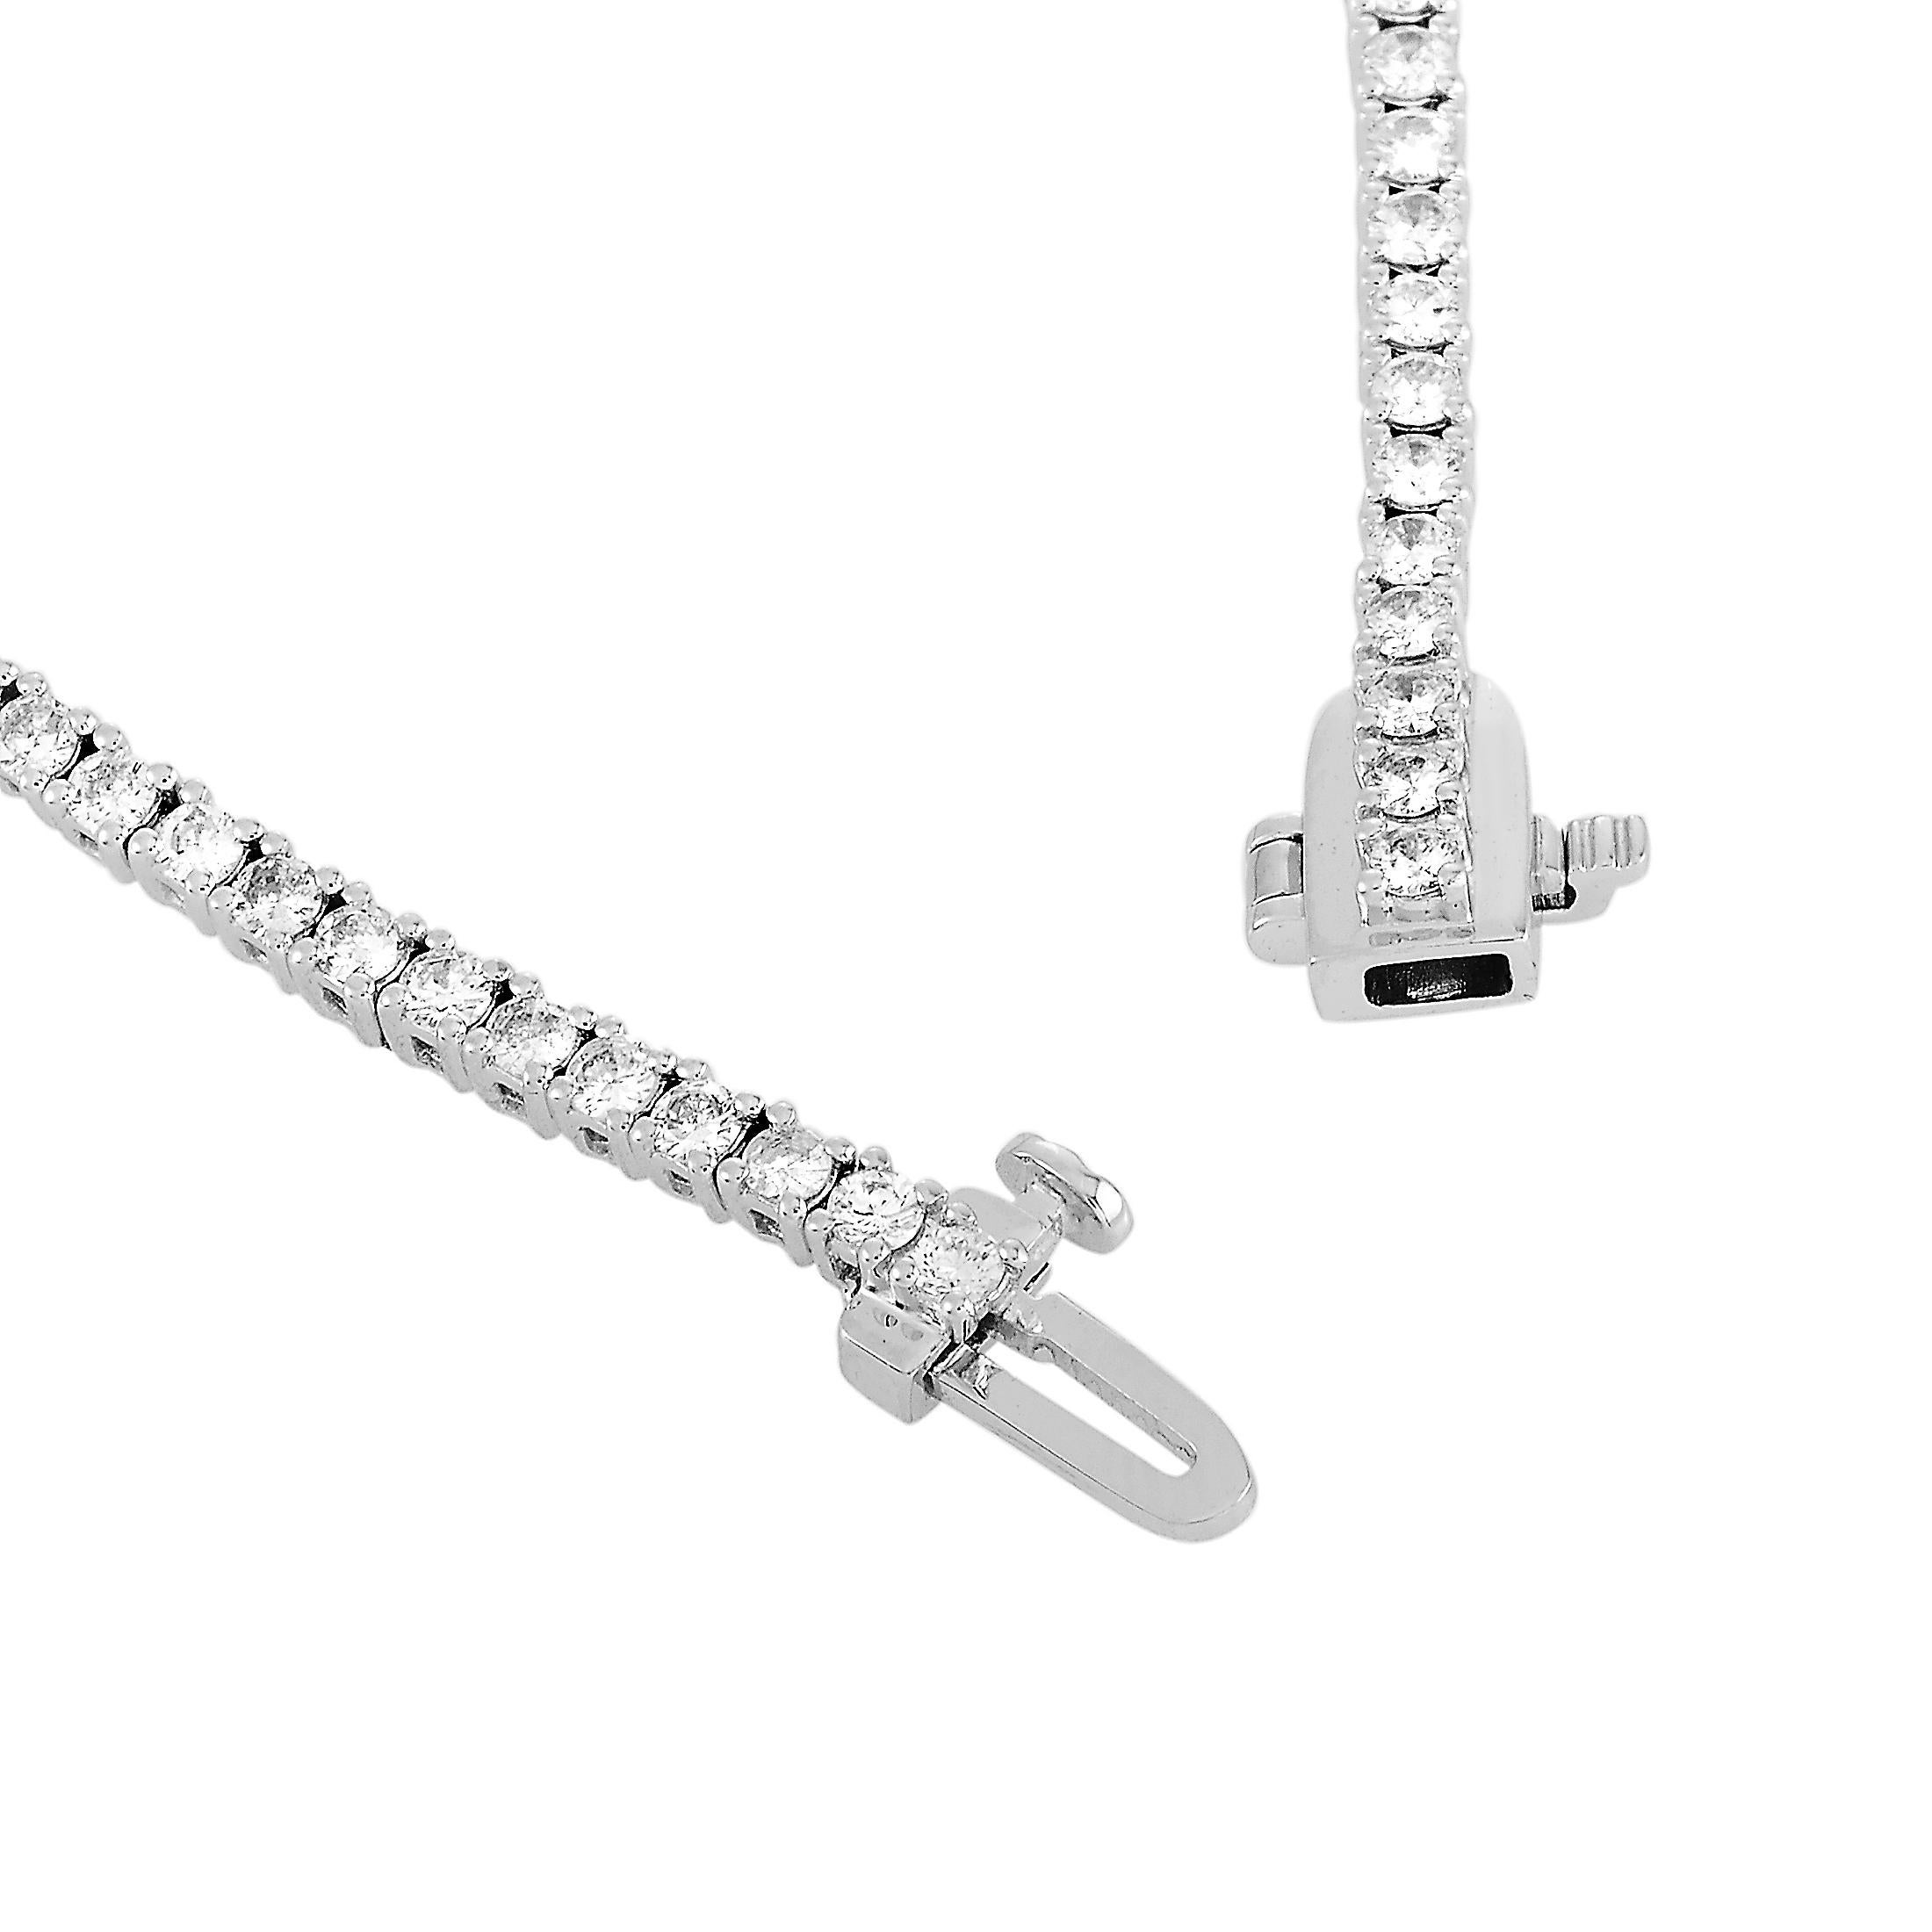 This LB Exclusive tennis bracelet is made out of 14K white gold and diamonds that total 2.02 carats. The bracelet weighs 6.9 grams and measures 7.50” in length.
 
 Offered in brand new condition, this jewelry piece includes a gift box.